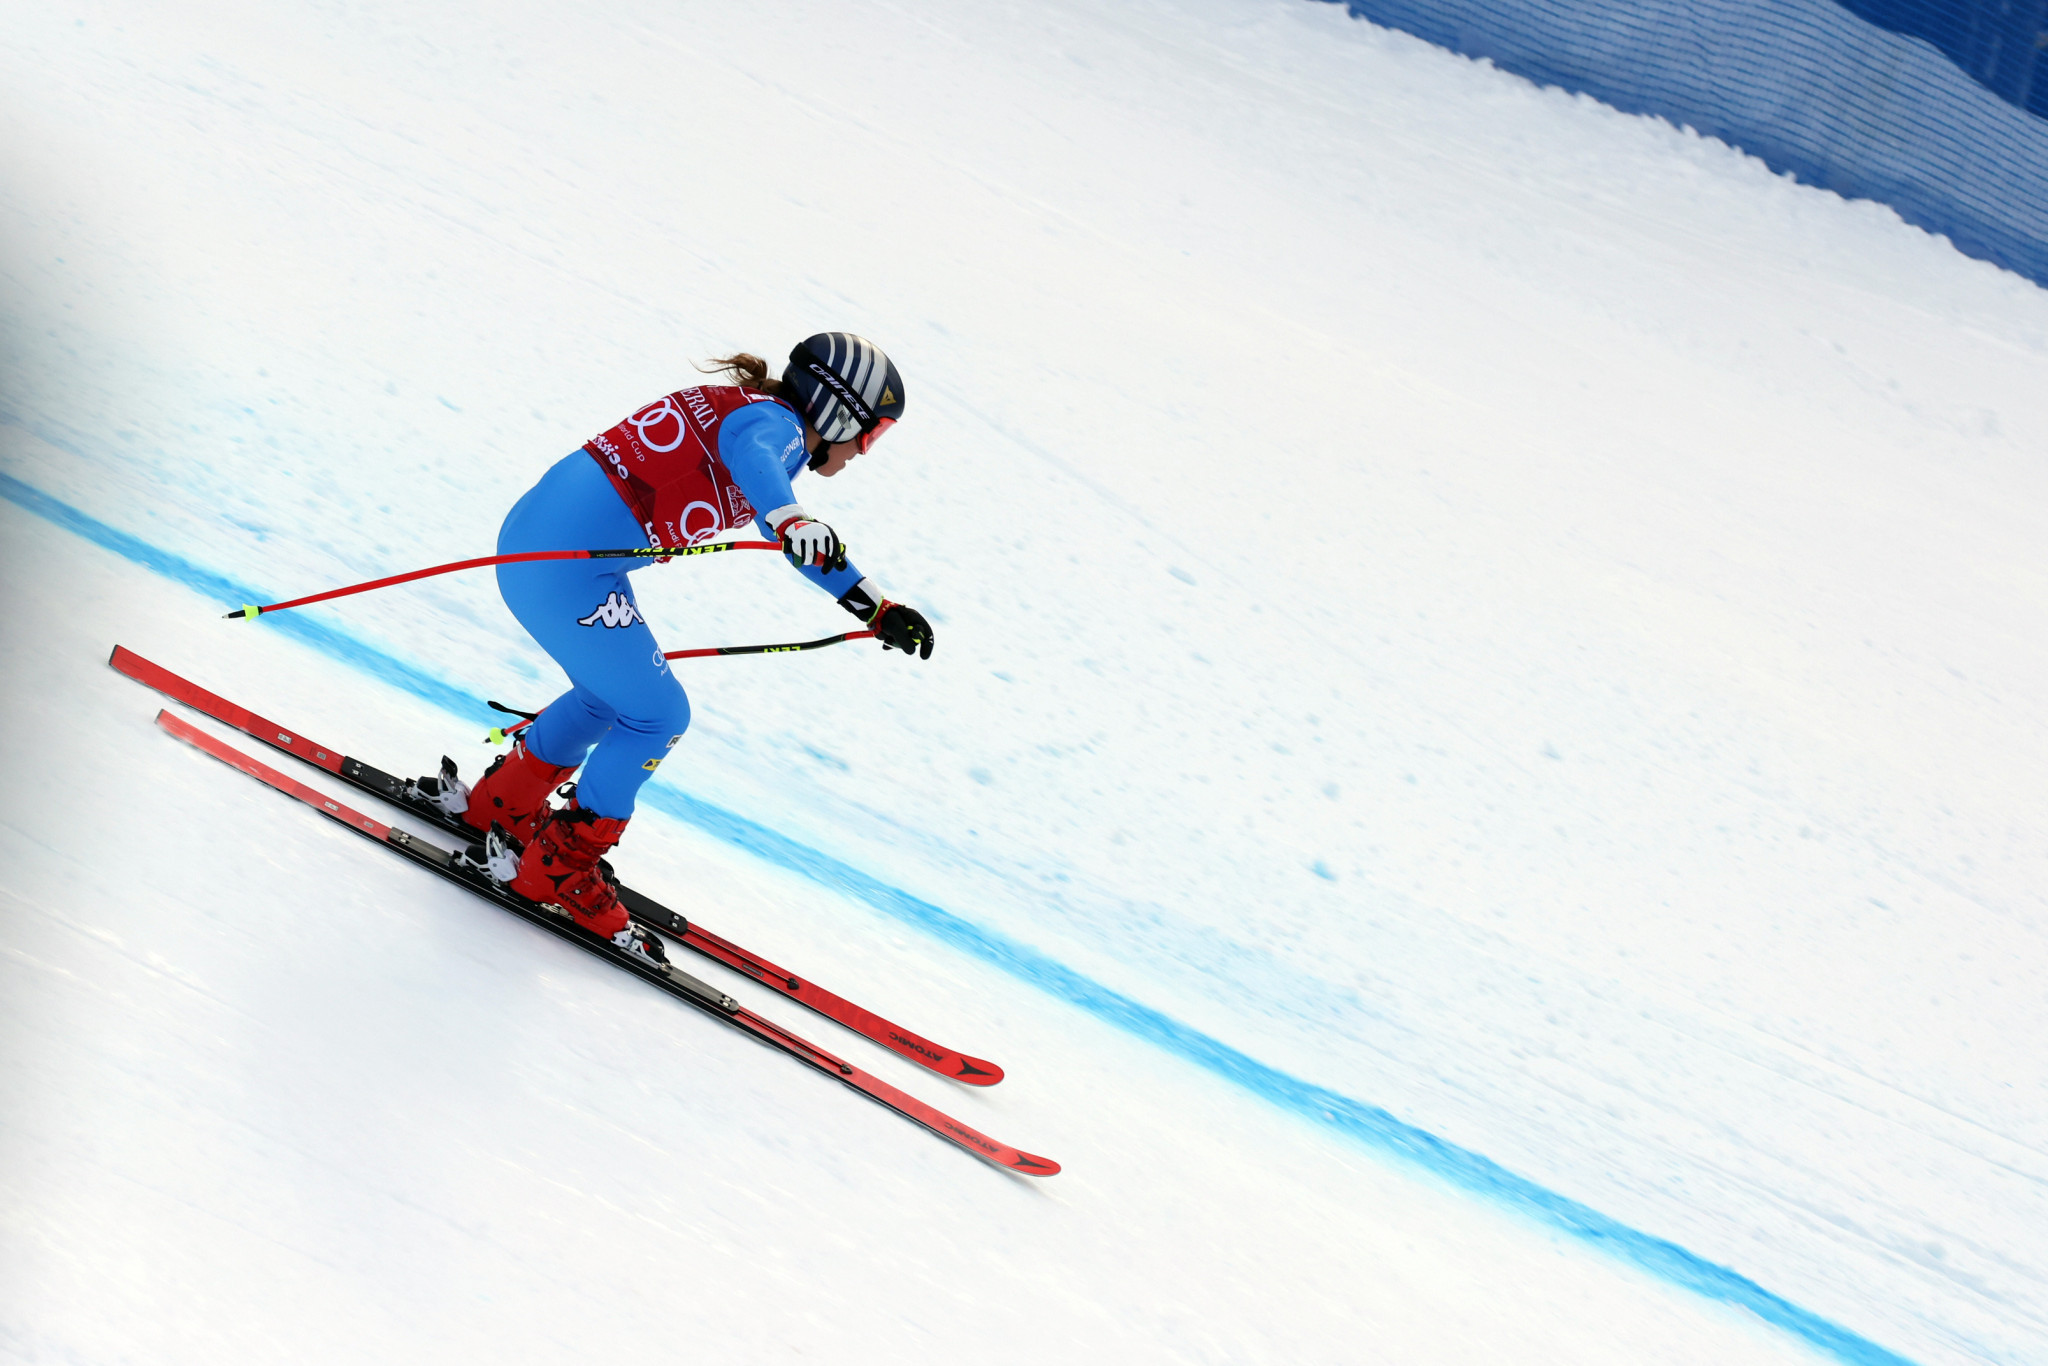 Goggia among favourites in first downhill races of women's Alpine Ski World Cup season